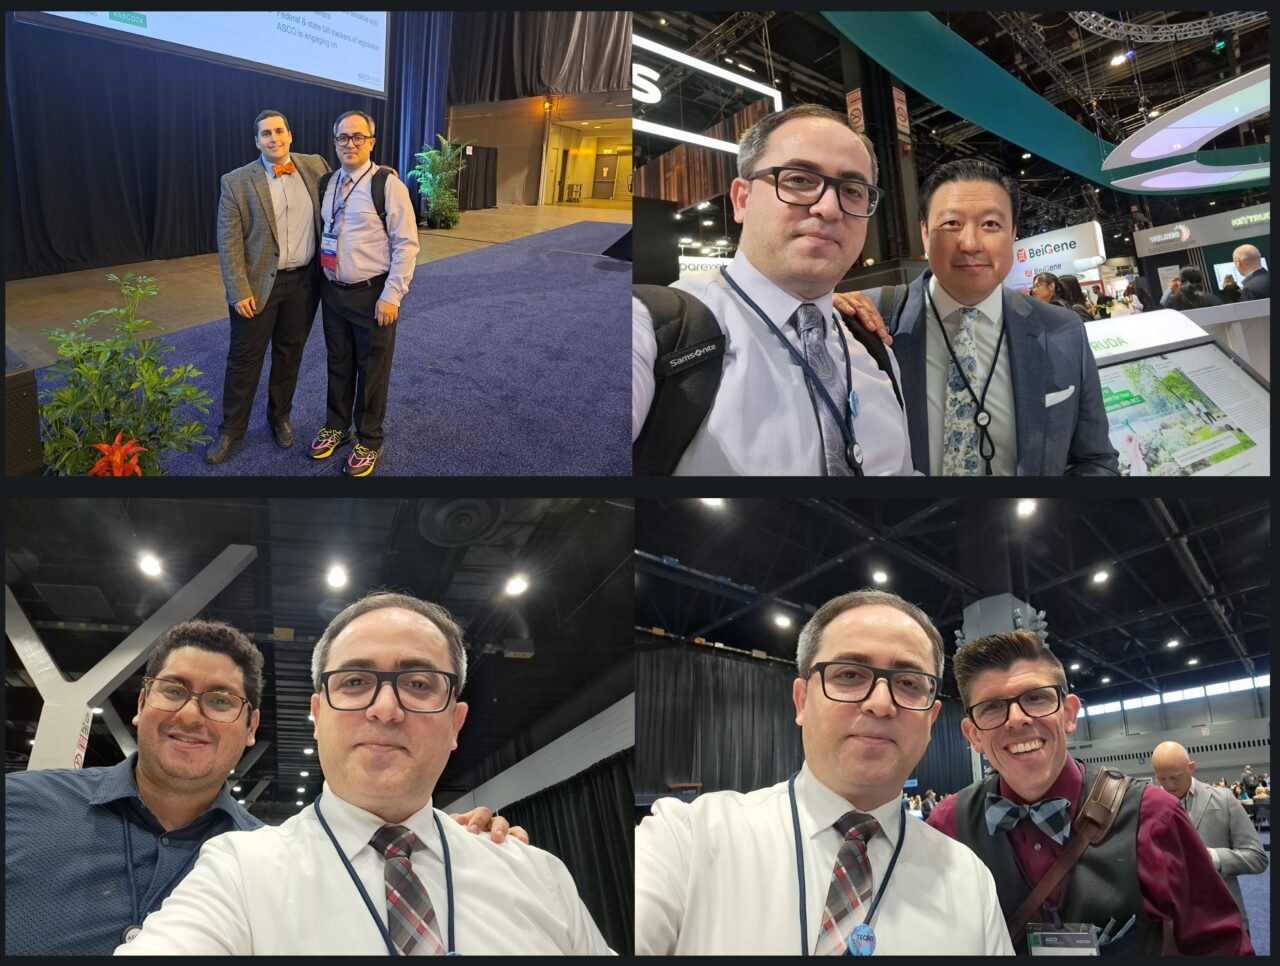 Dawood Findakly: Feeling over the moon after an incredible ASCO24!